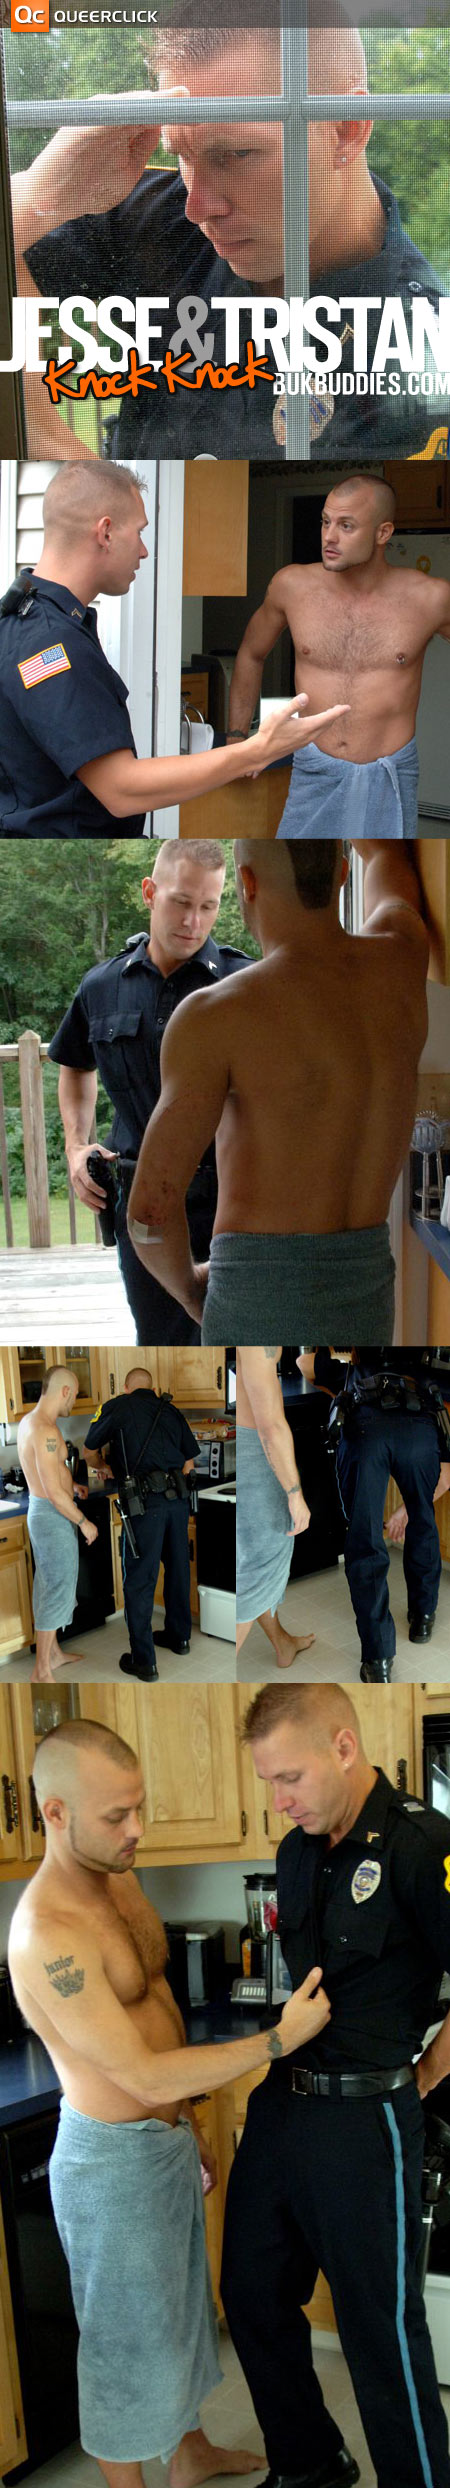 Jesse and Tristan satisfy your cop fantasy